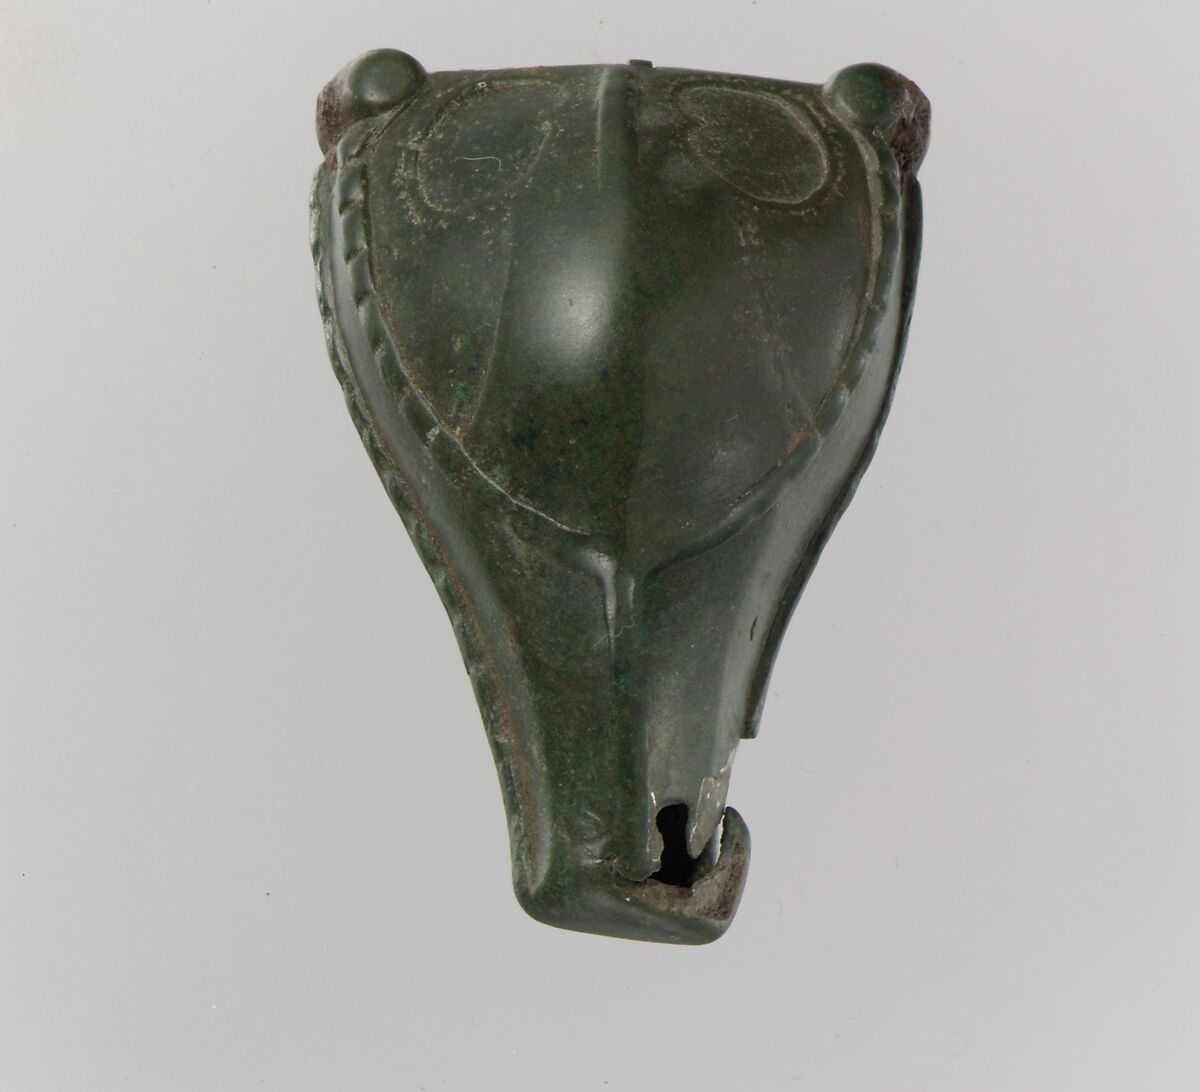 Brooch with Boar’s-Head, Copper alloy, gilt and cast; copper alloy pin secured in hinge with..., Vendel 